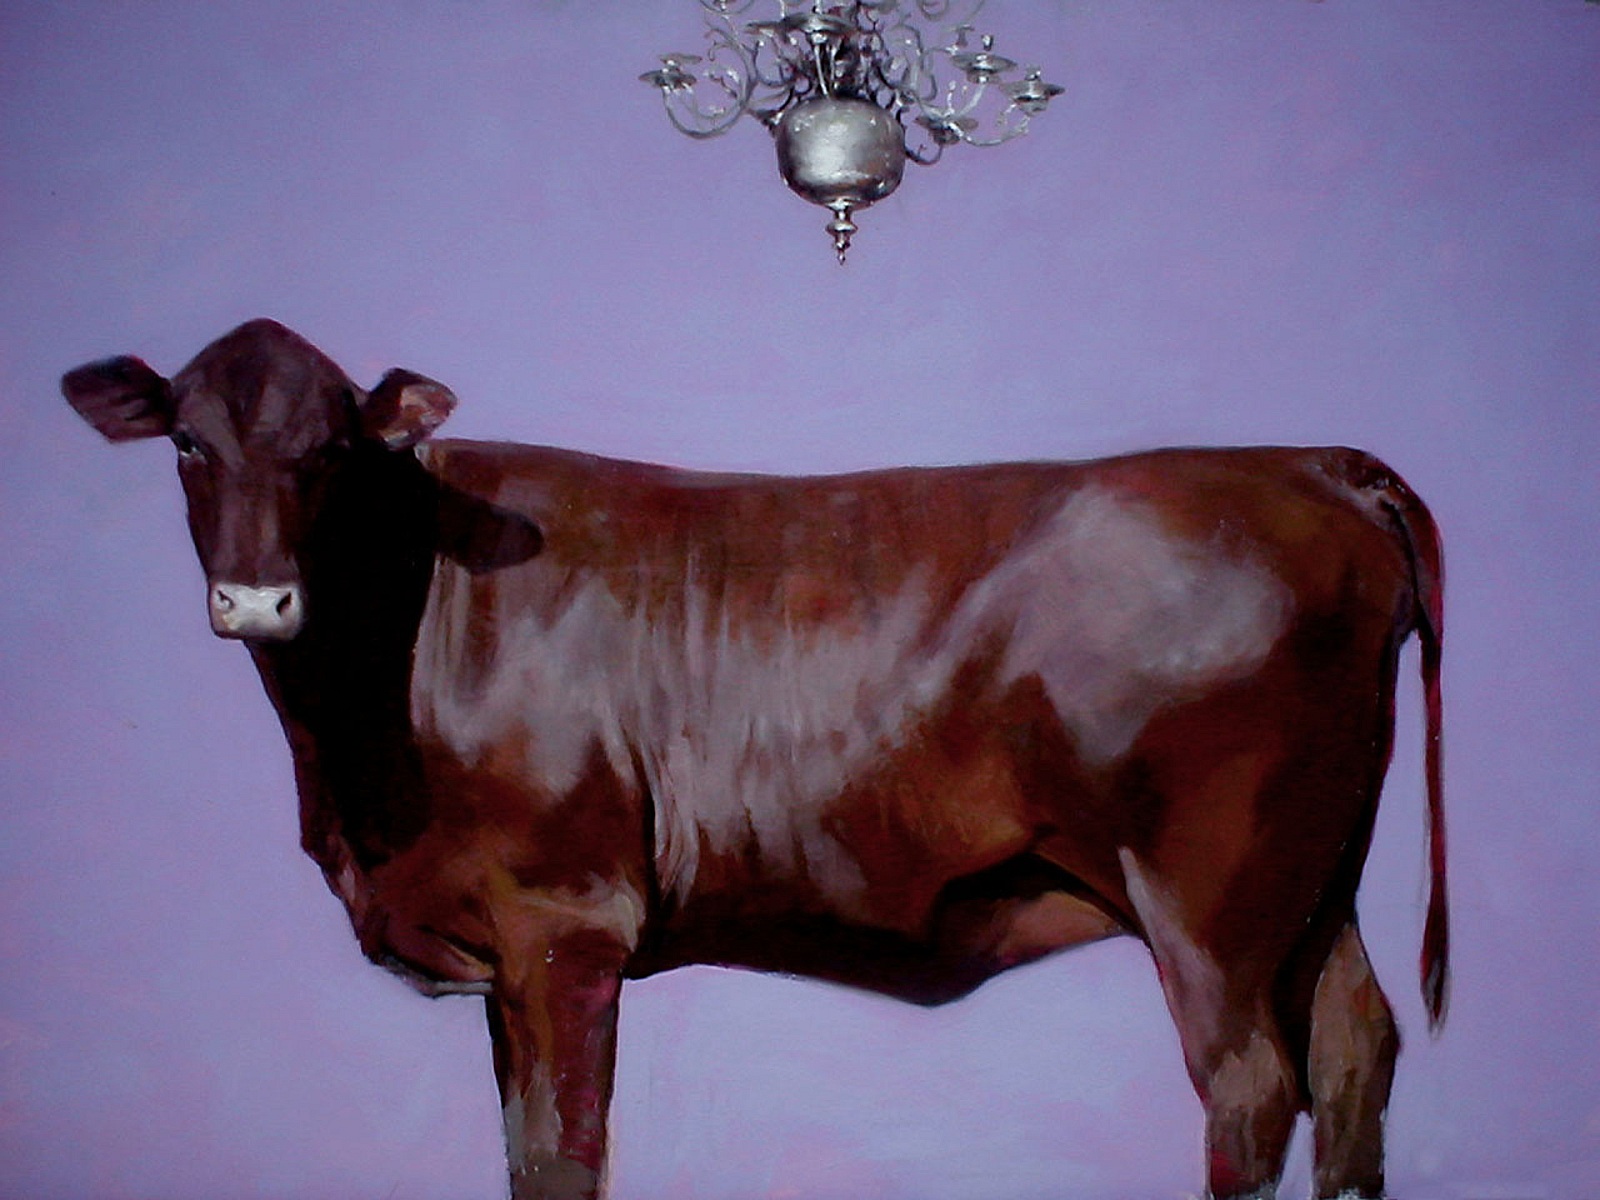 Purple Cow - 2003, oil on canvas, 150 x 210, private collection, RO - 15